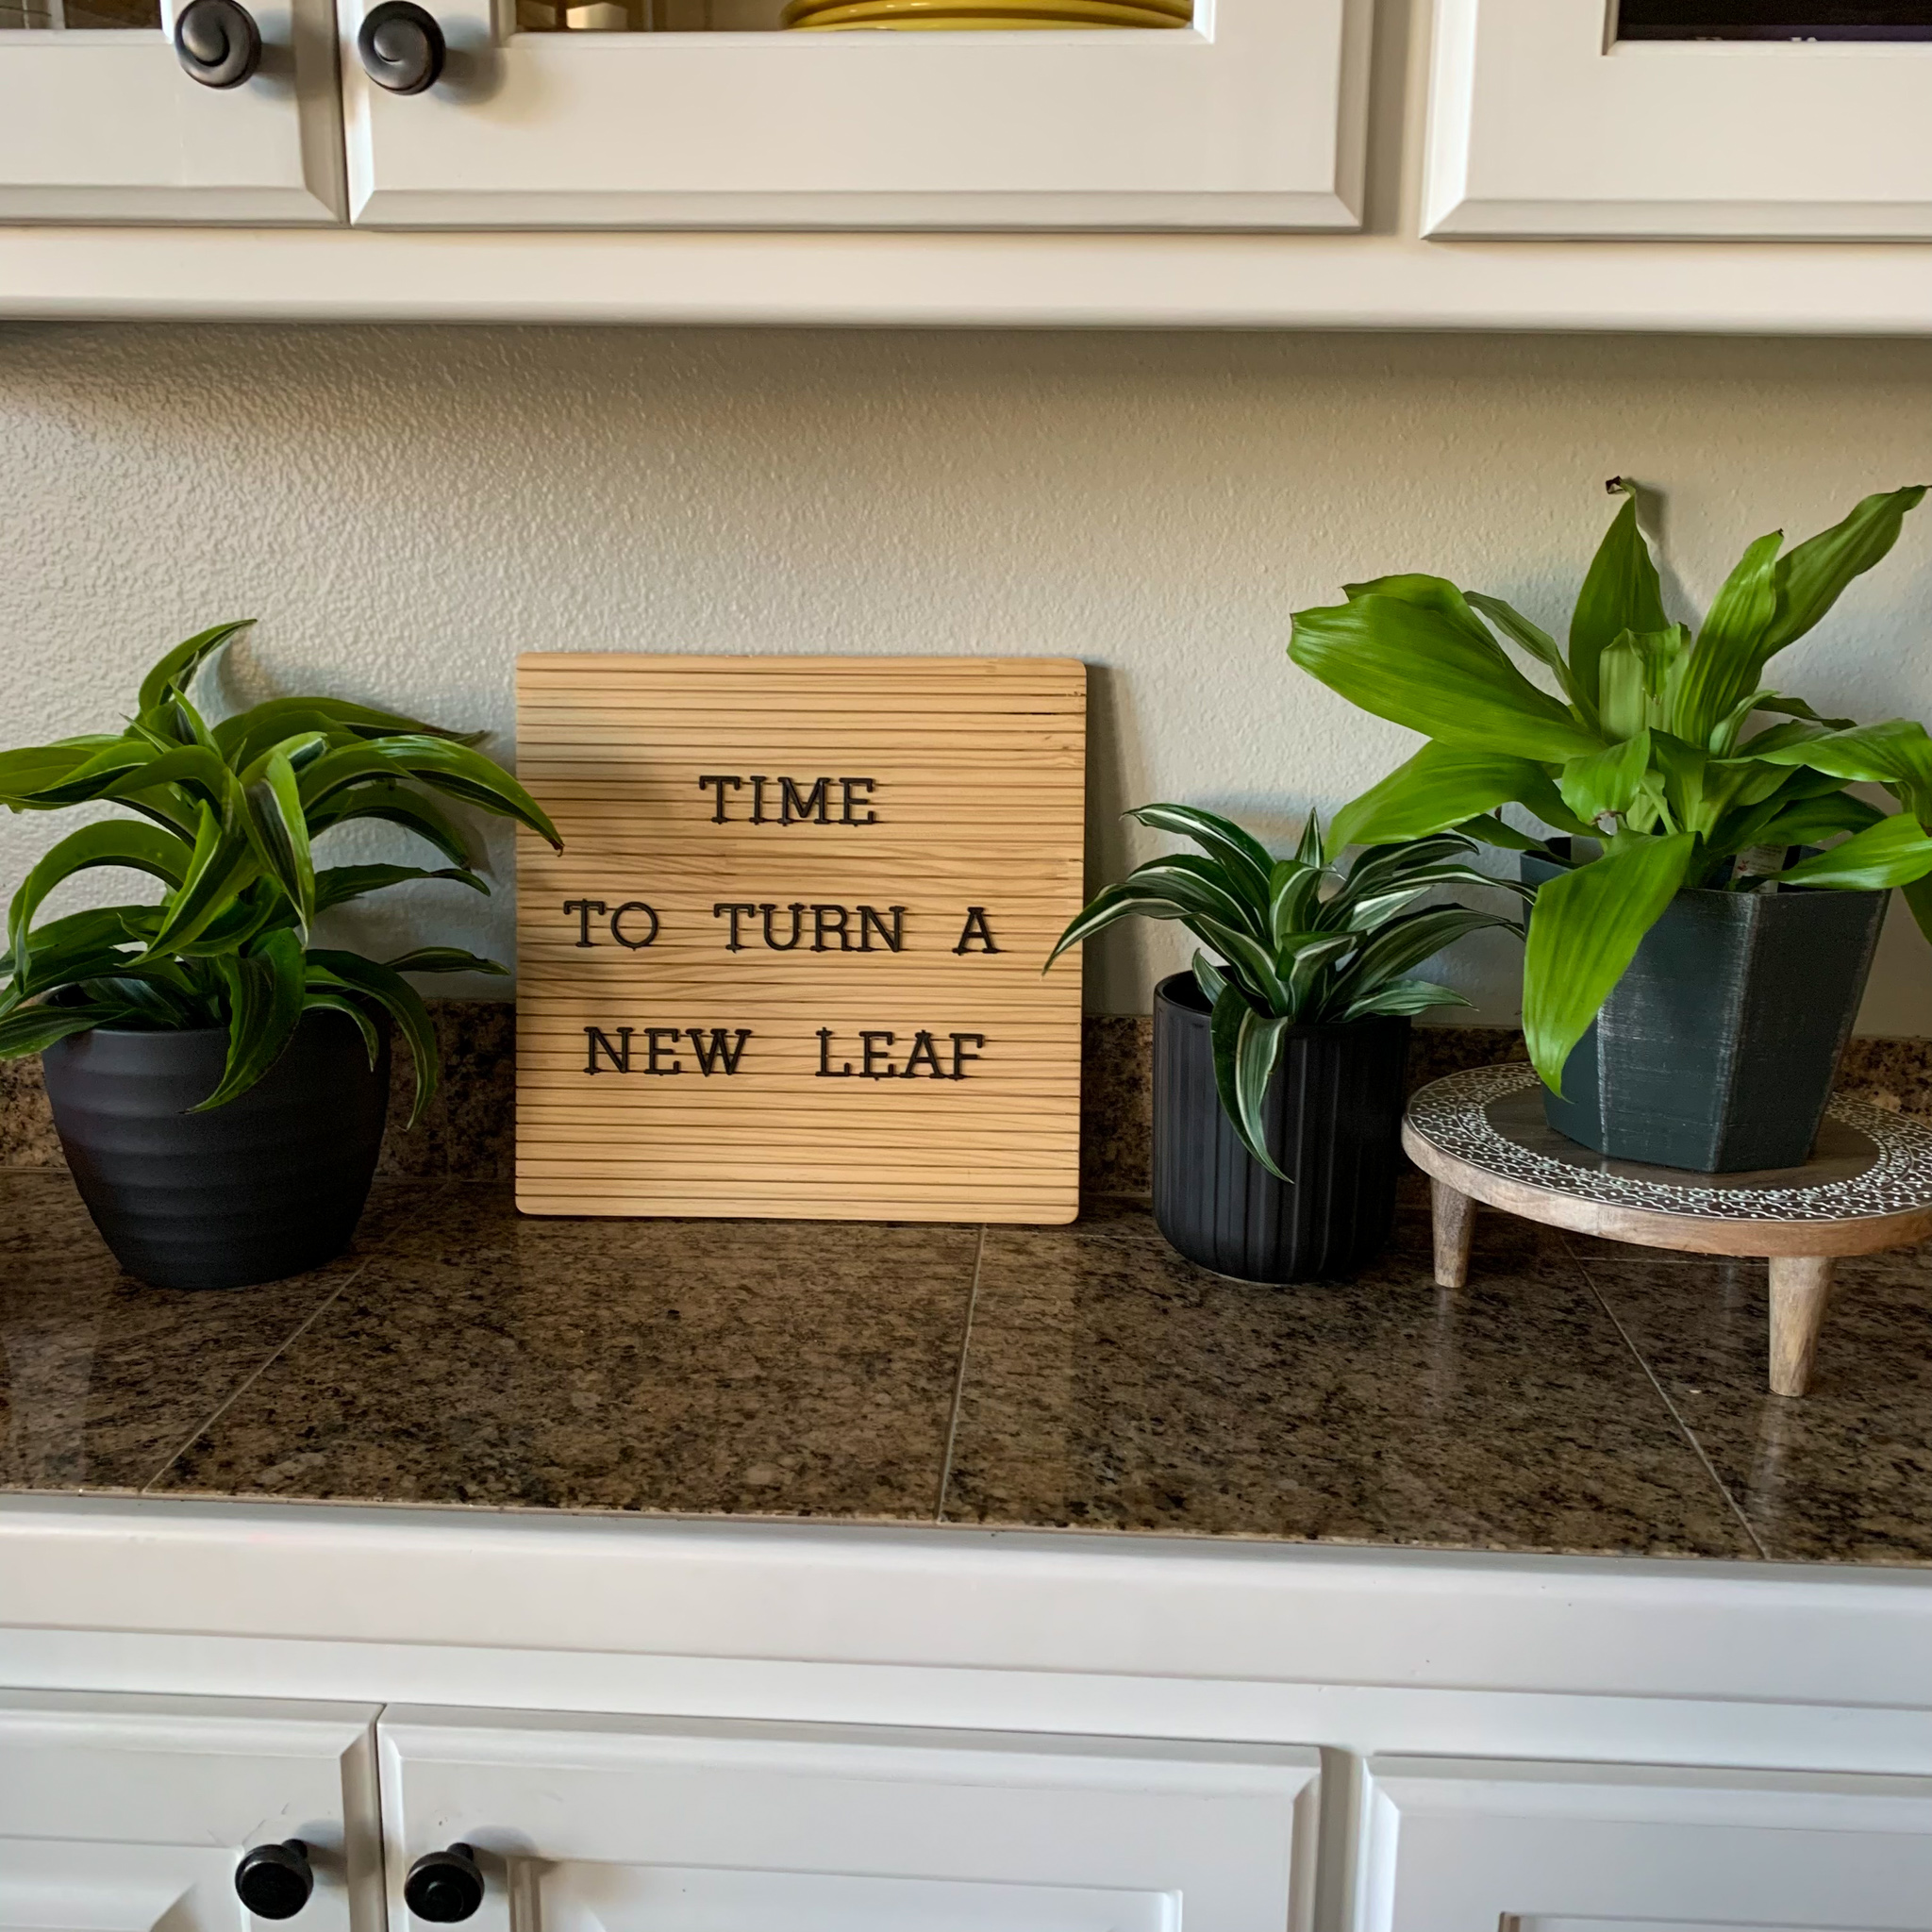 Best Spring Letter Boards Plus Quotes about Mardi Gras